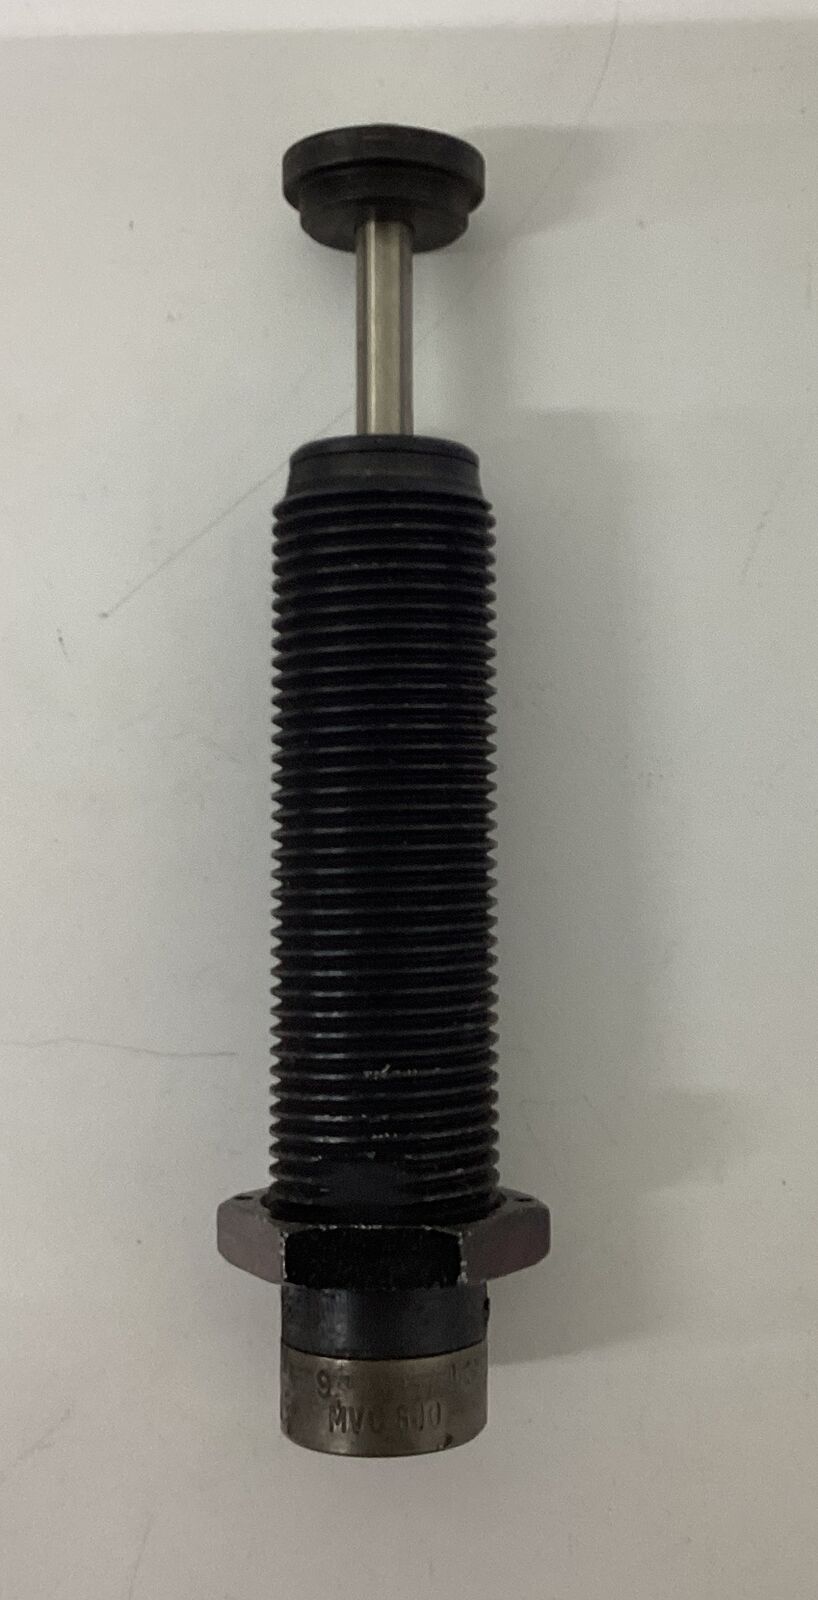 Ace Controls MVC600 Shock Absorber (RE158)